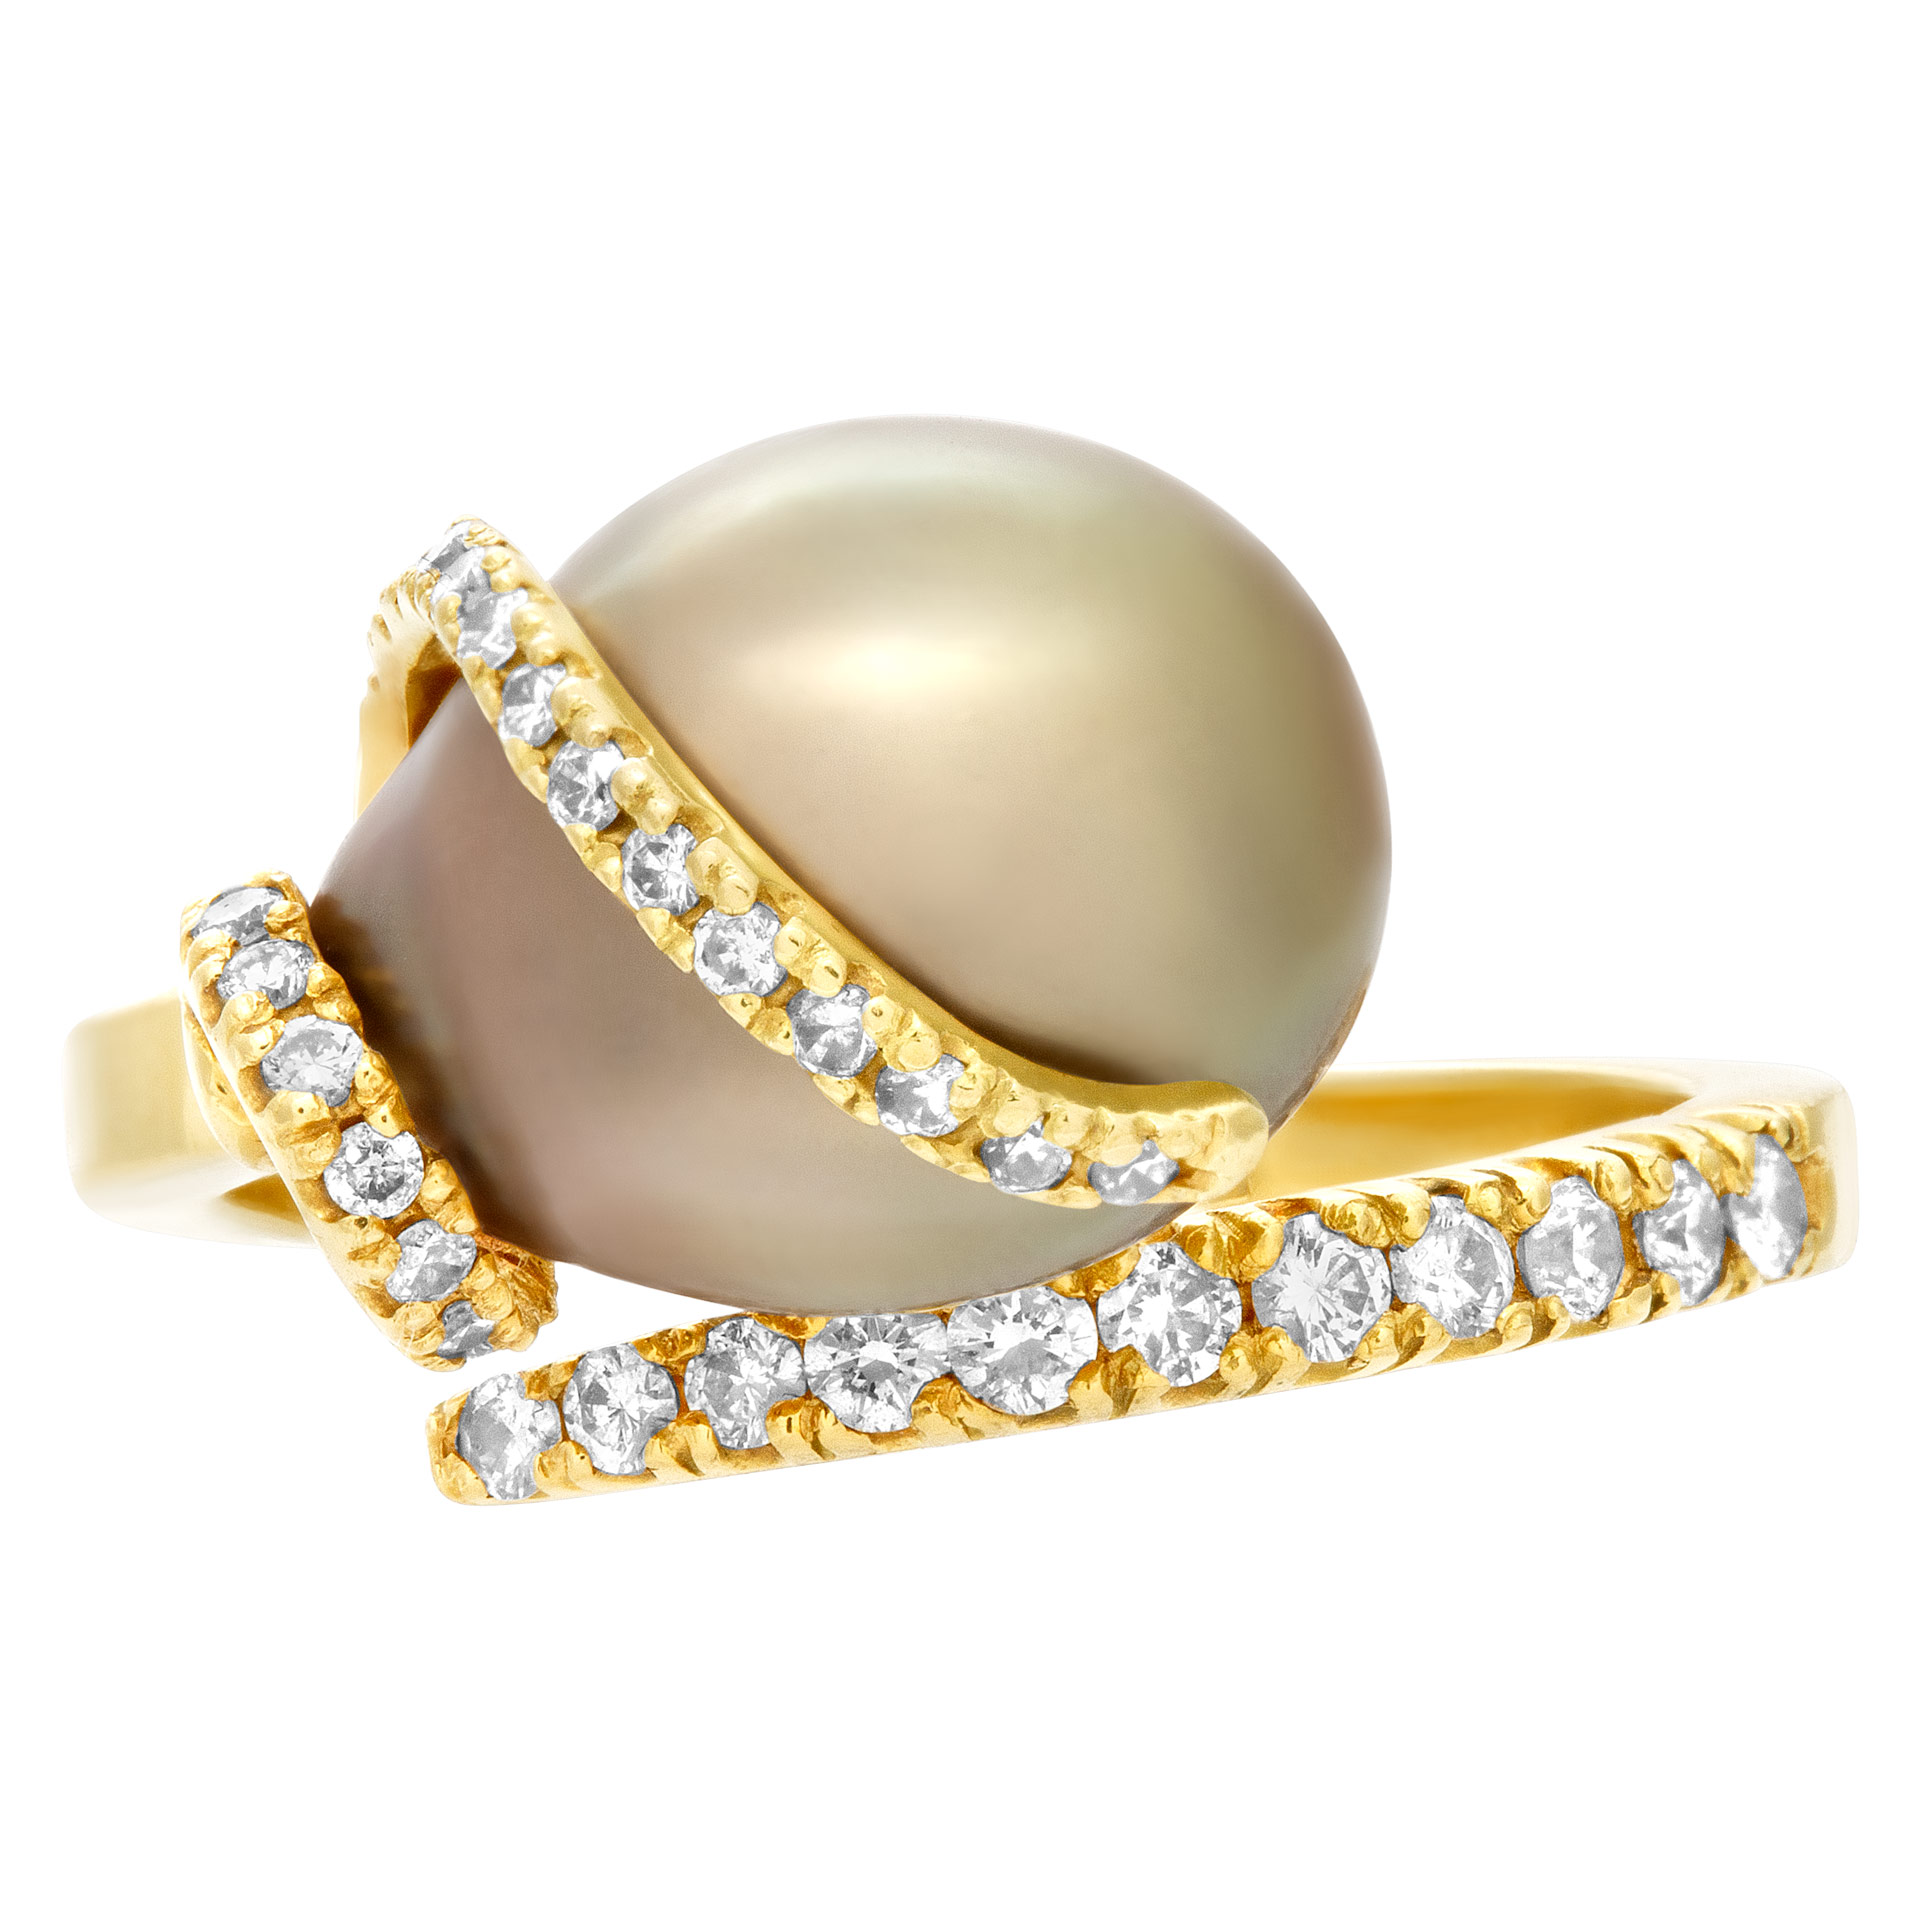 South Sea pearl ring with diamond accents in 18k gold image 3